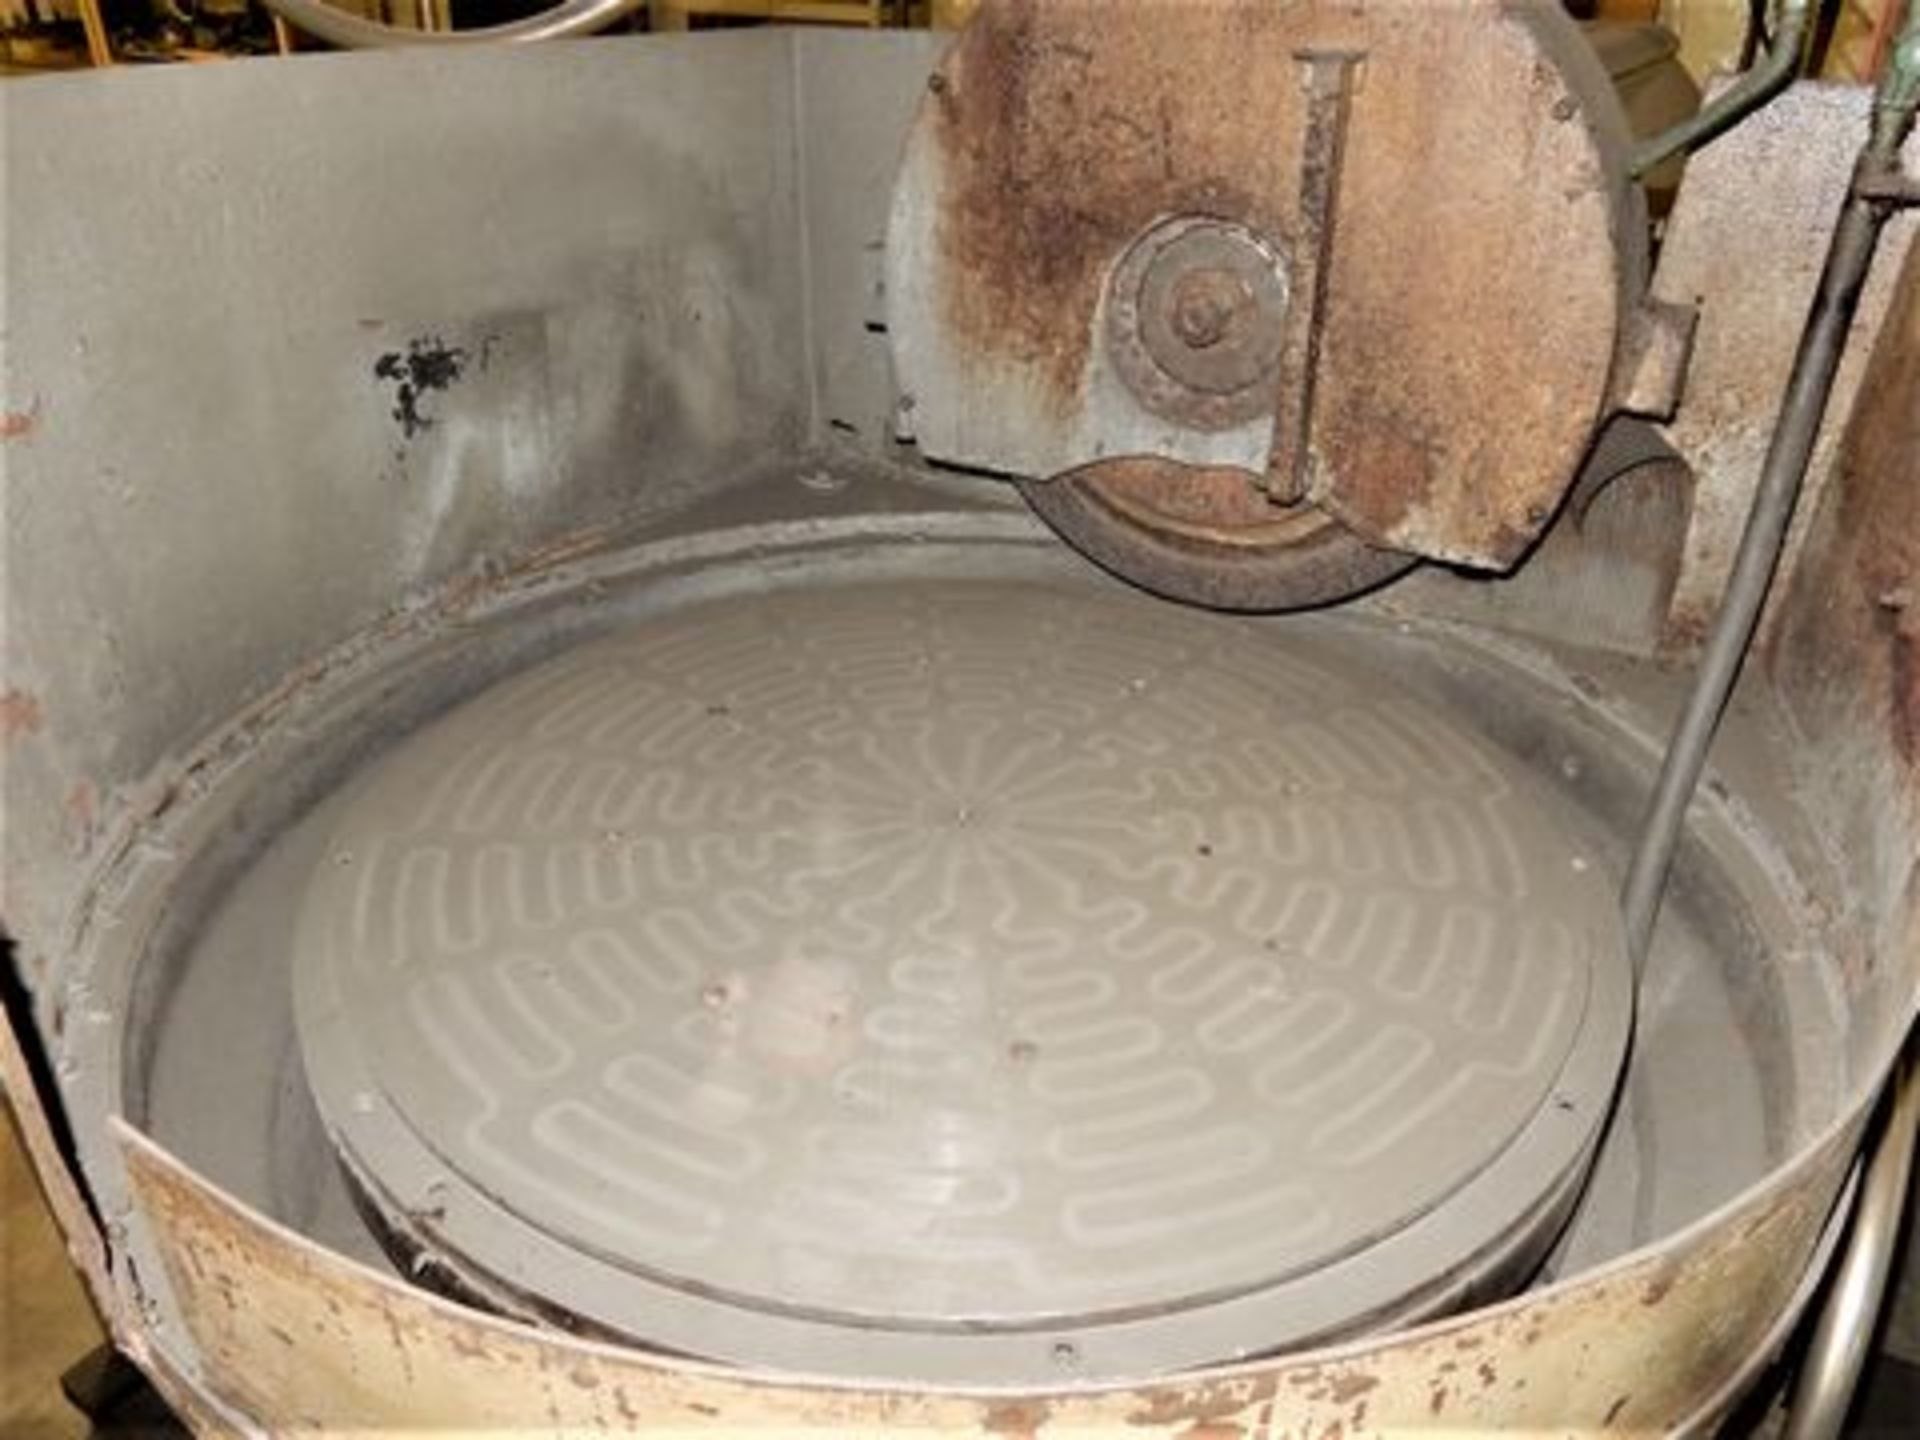 ARTER ROTARY SURFACE GRINDER, M# B-30, S/N 887, 31" MAG CHUCK, 2-1/4" X 20" WHEEL - Image 3 of 3